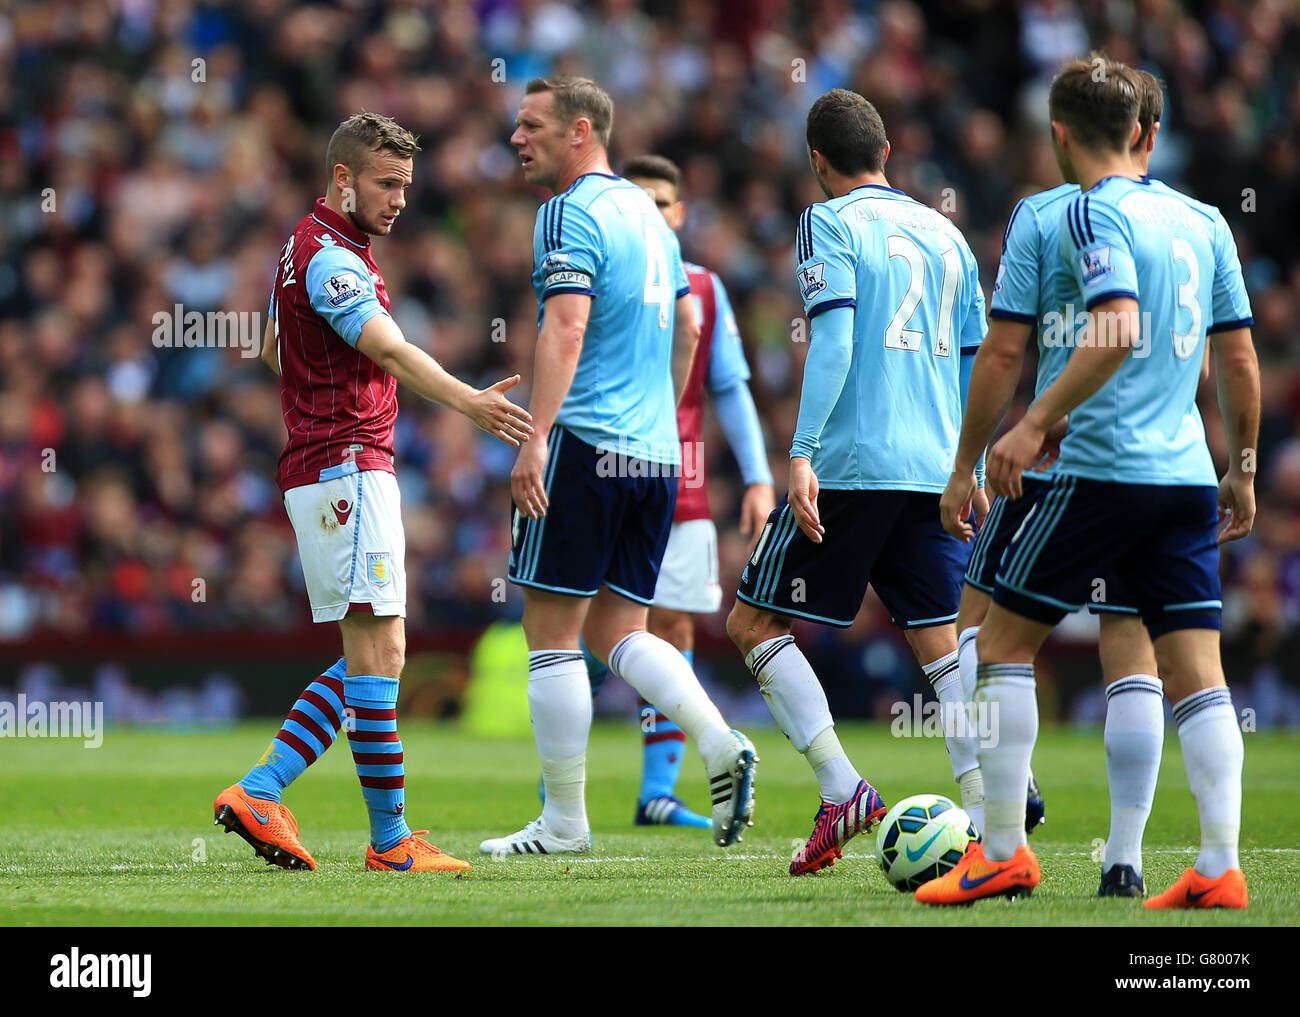 West Ham United's Morgan Amalfitano (21) refuses to shake hands with Aston Villa's Tom Cleverley during the Barclays Premier League match at Villa Park, Birmingham. Stock Photo